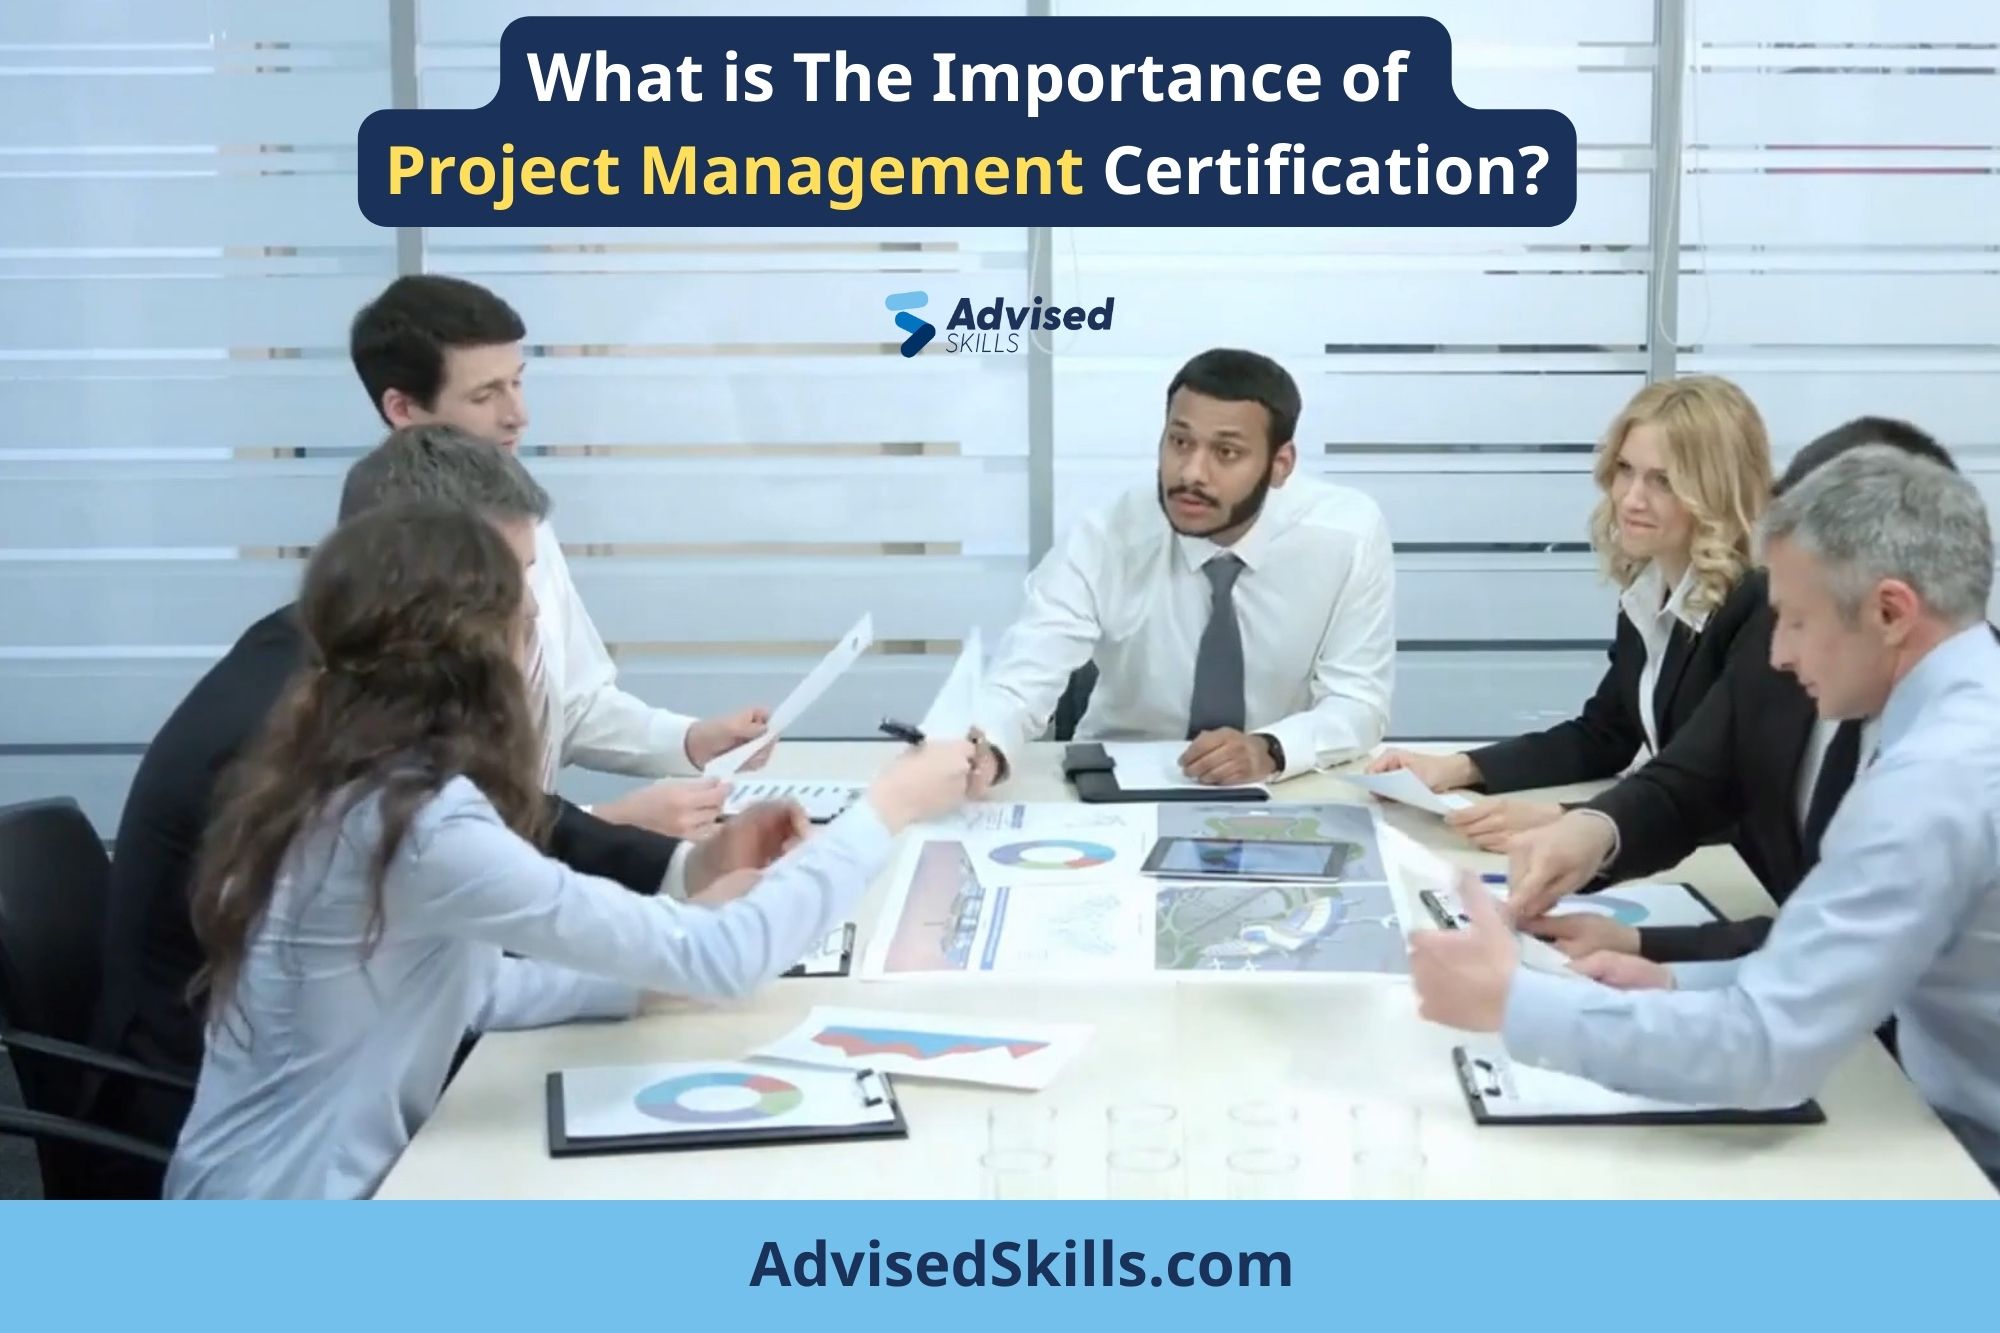 Importance of Project Management Certification